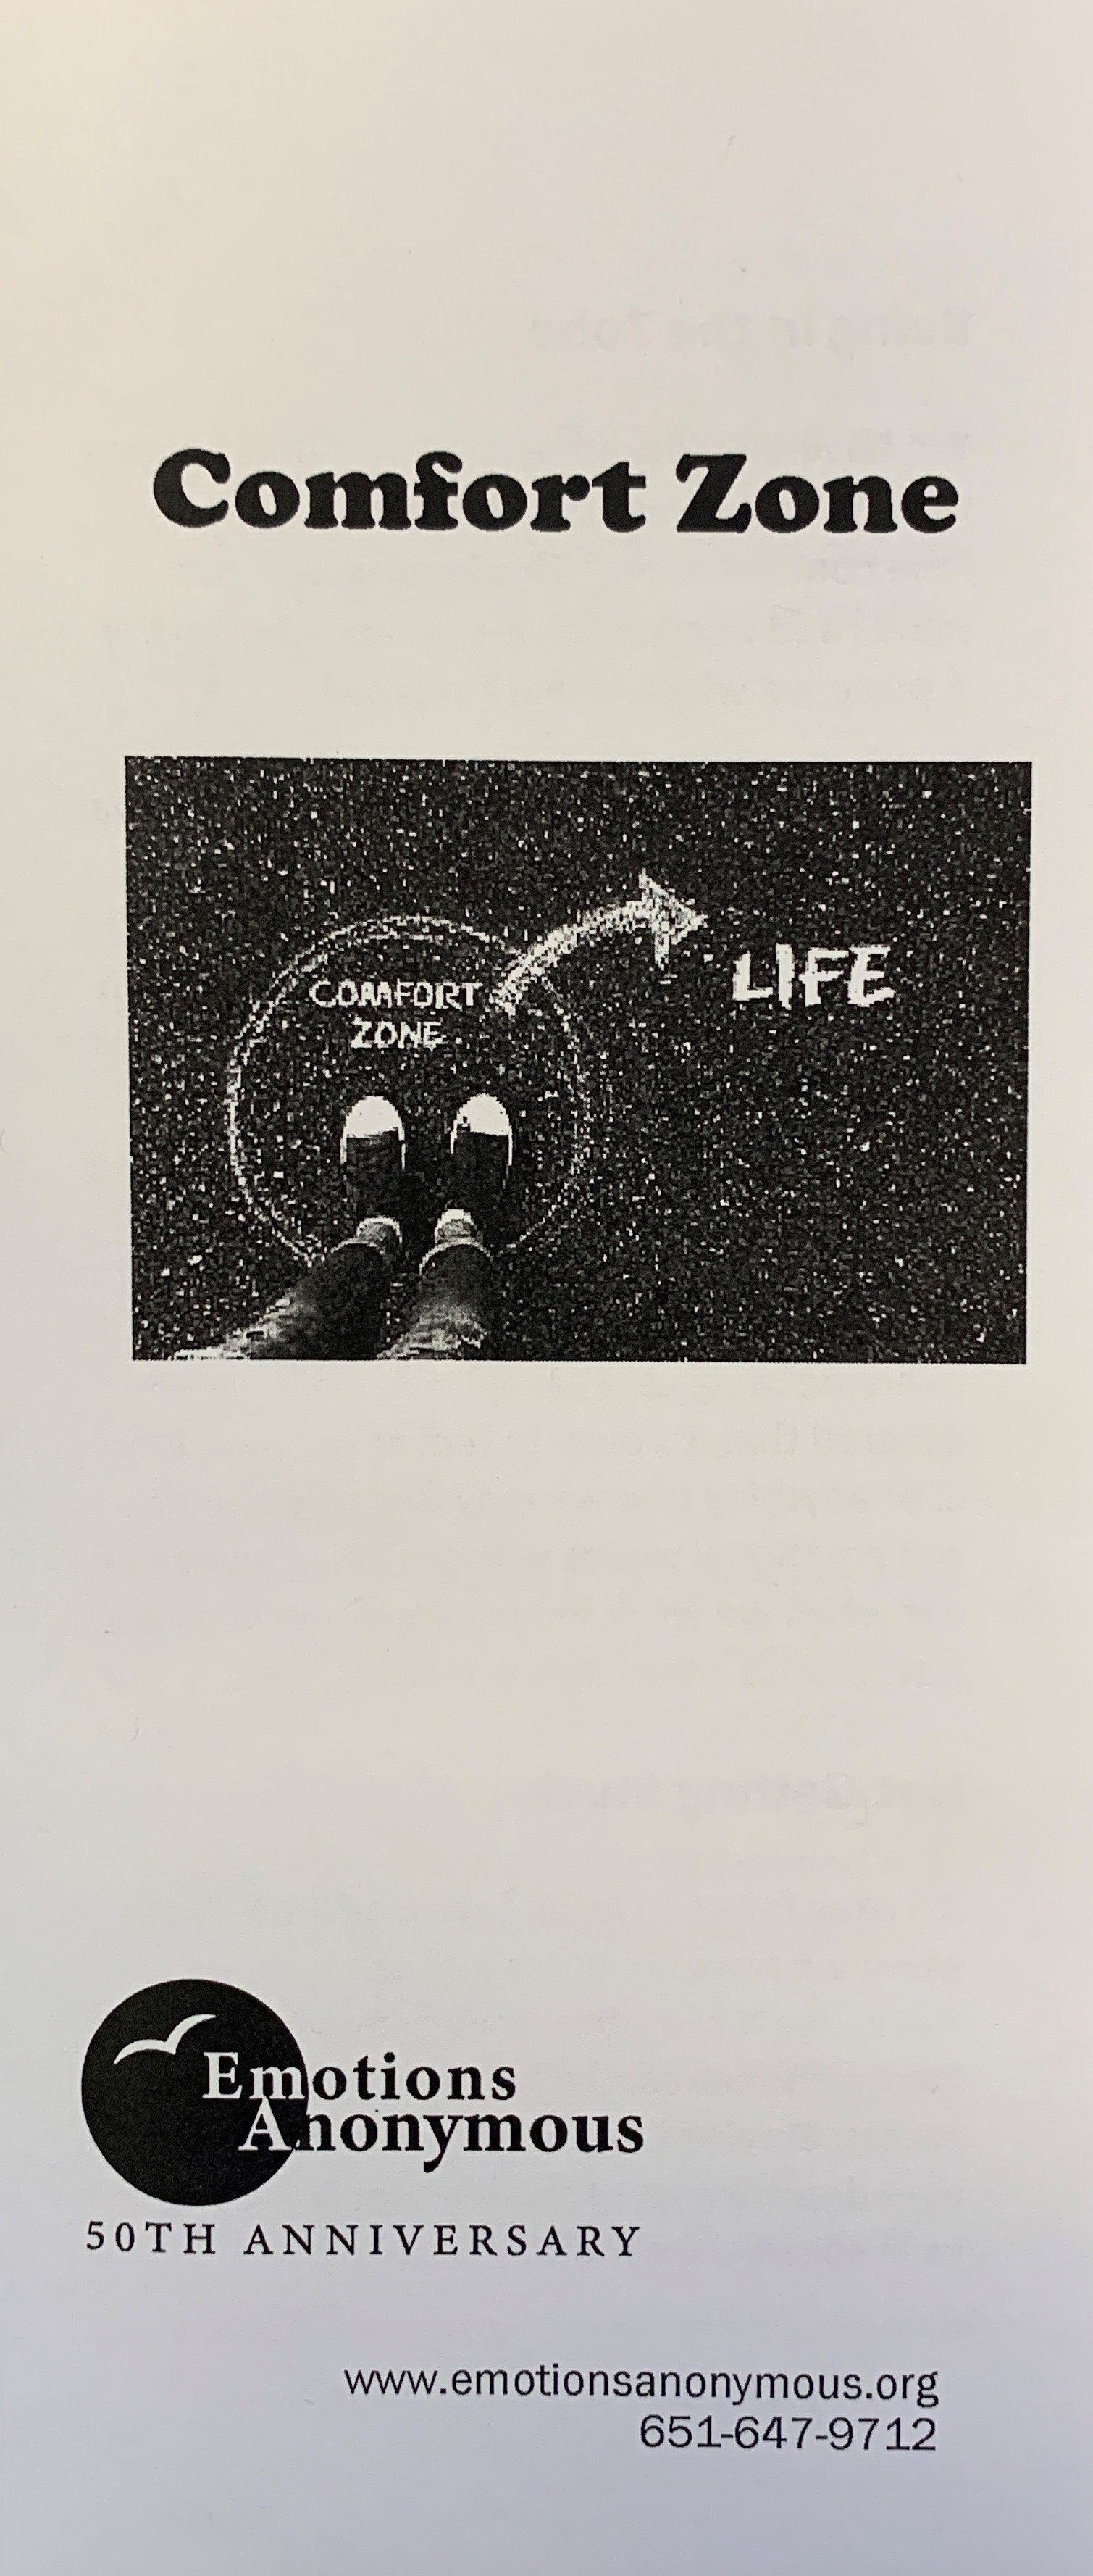 Item #91 — "Comfort Zone" Pamphlet (New in 2020)